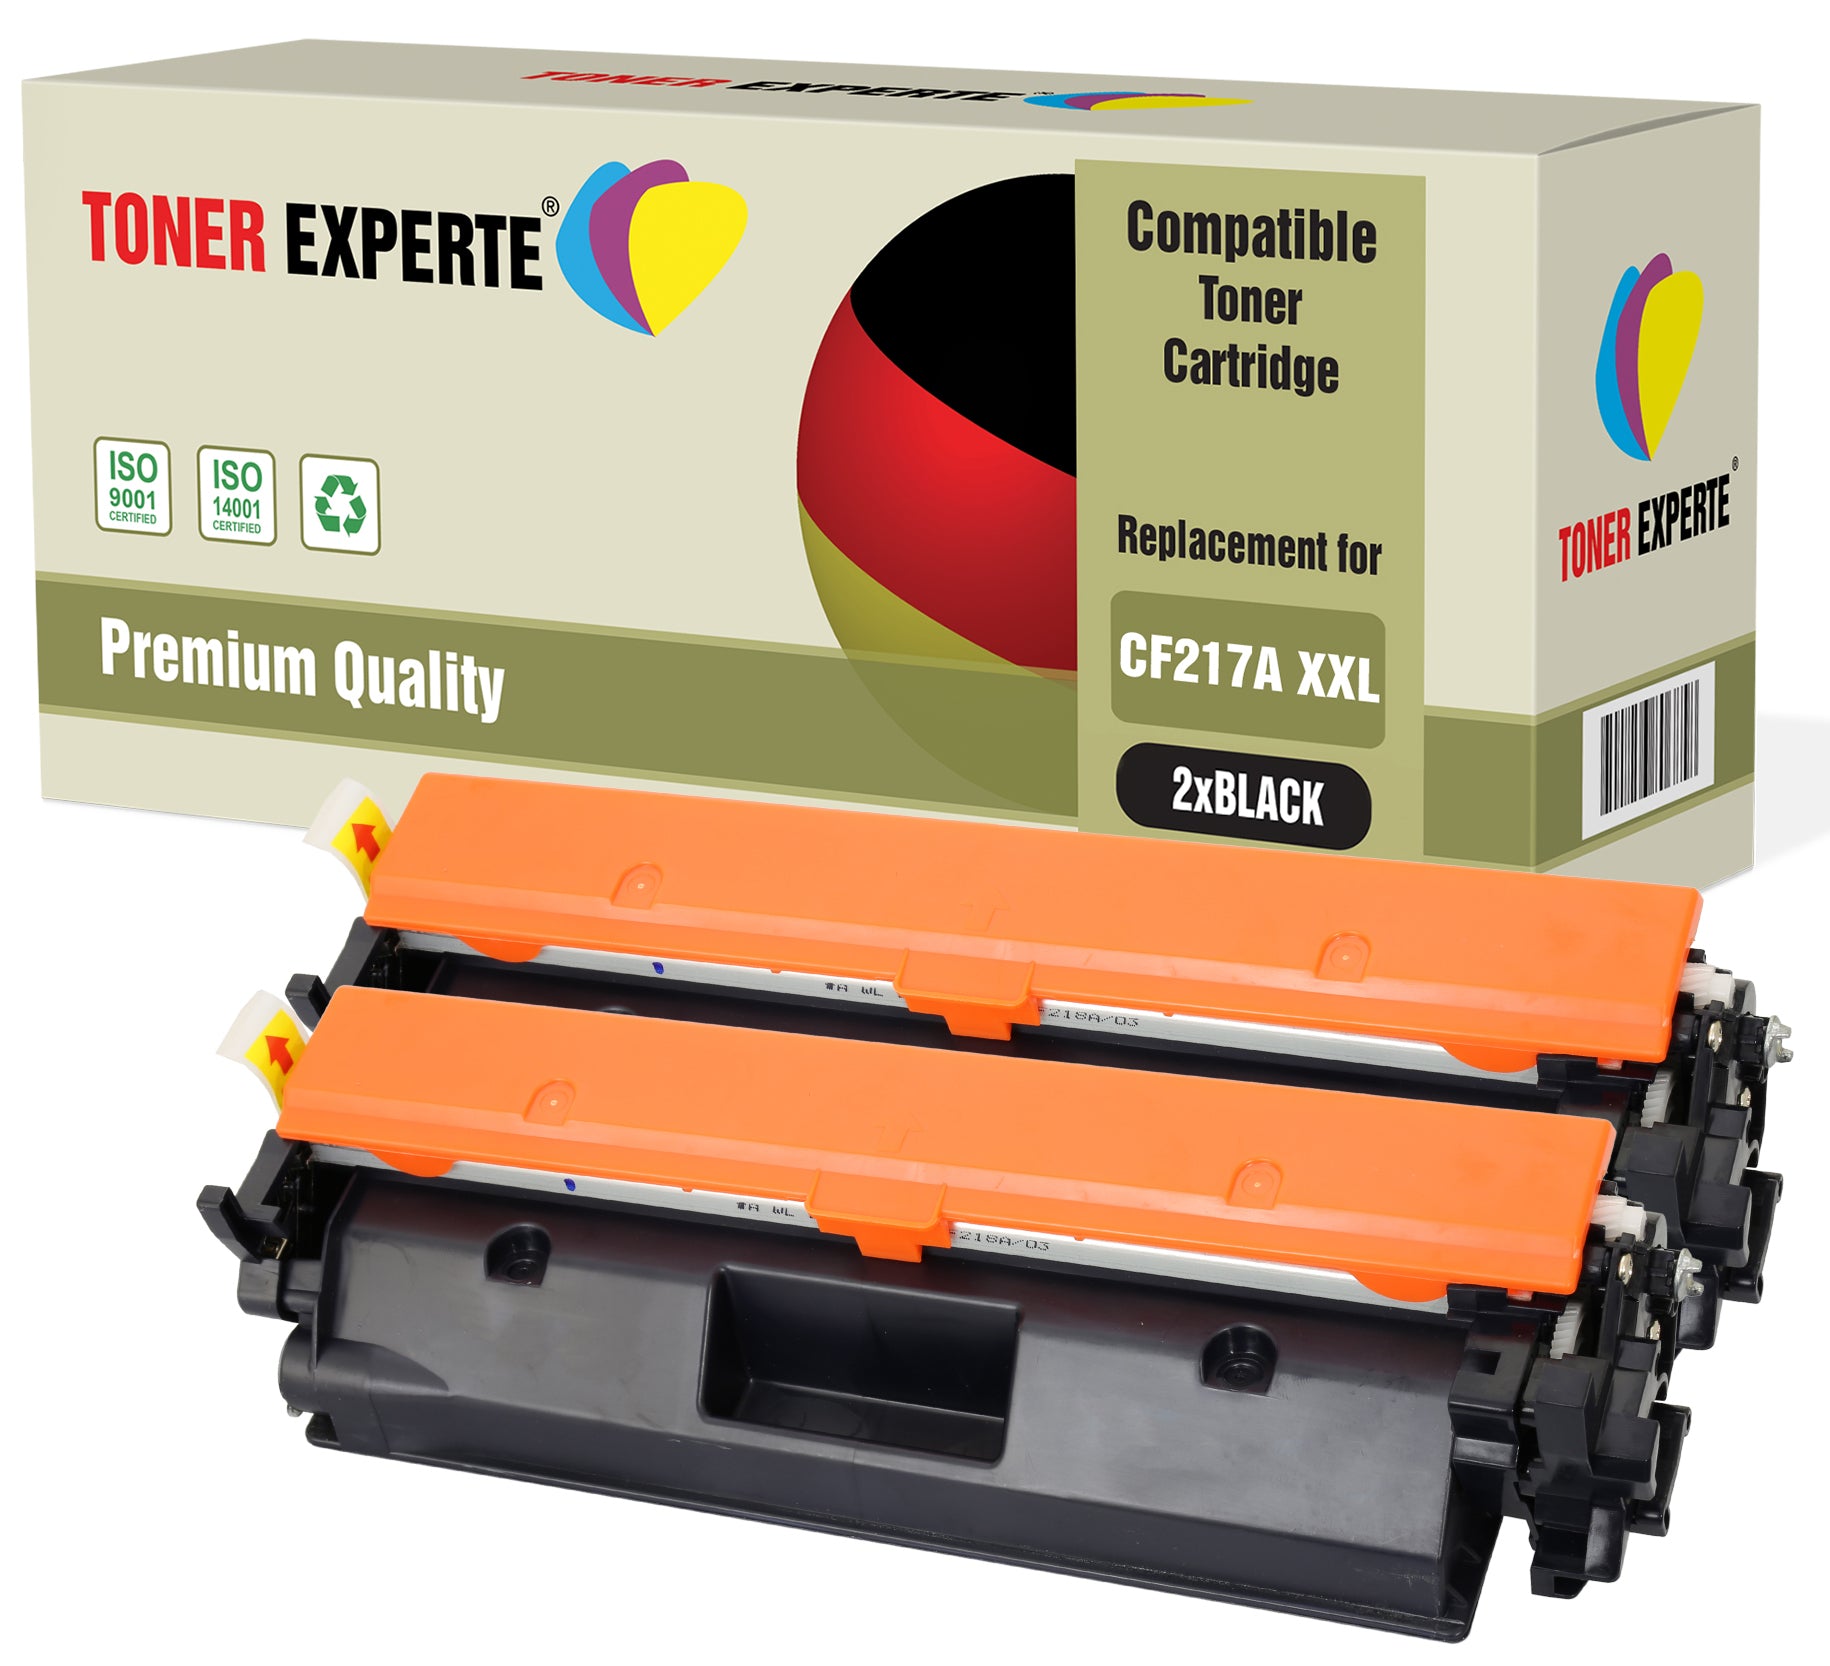 2-Pack TONER EXPERTE® Compatible with CF217A 17A XXL Premium Toner Cartridges Replacement for HP LaserJet Pro MFP M130nw, M130fn, M130fw, M130a, M102a, M102w